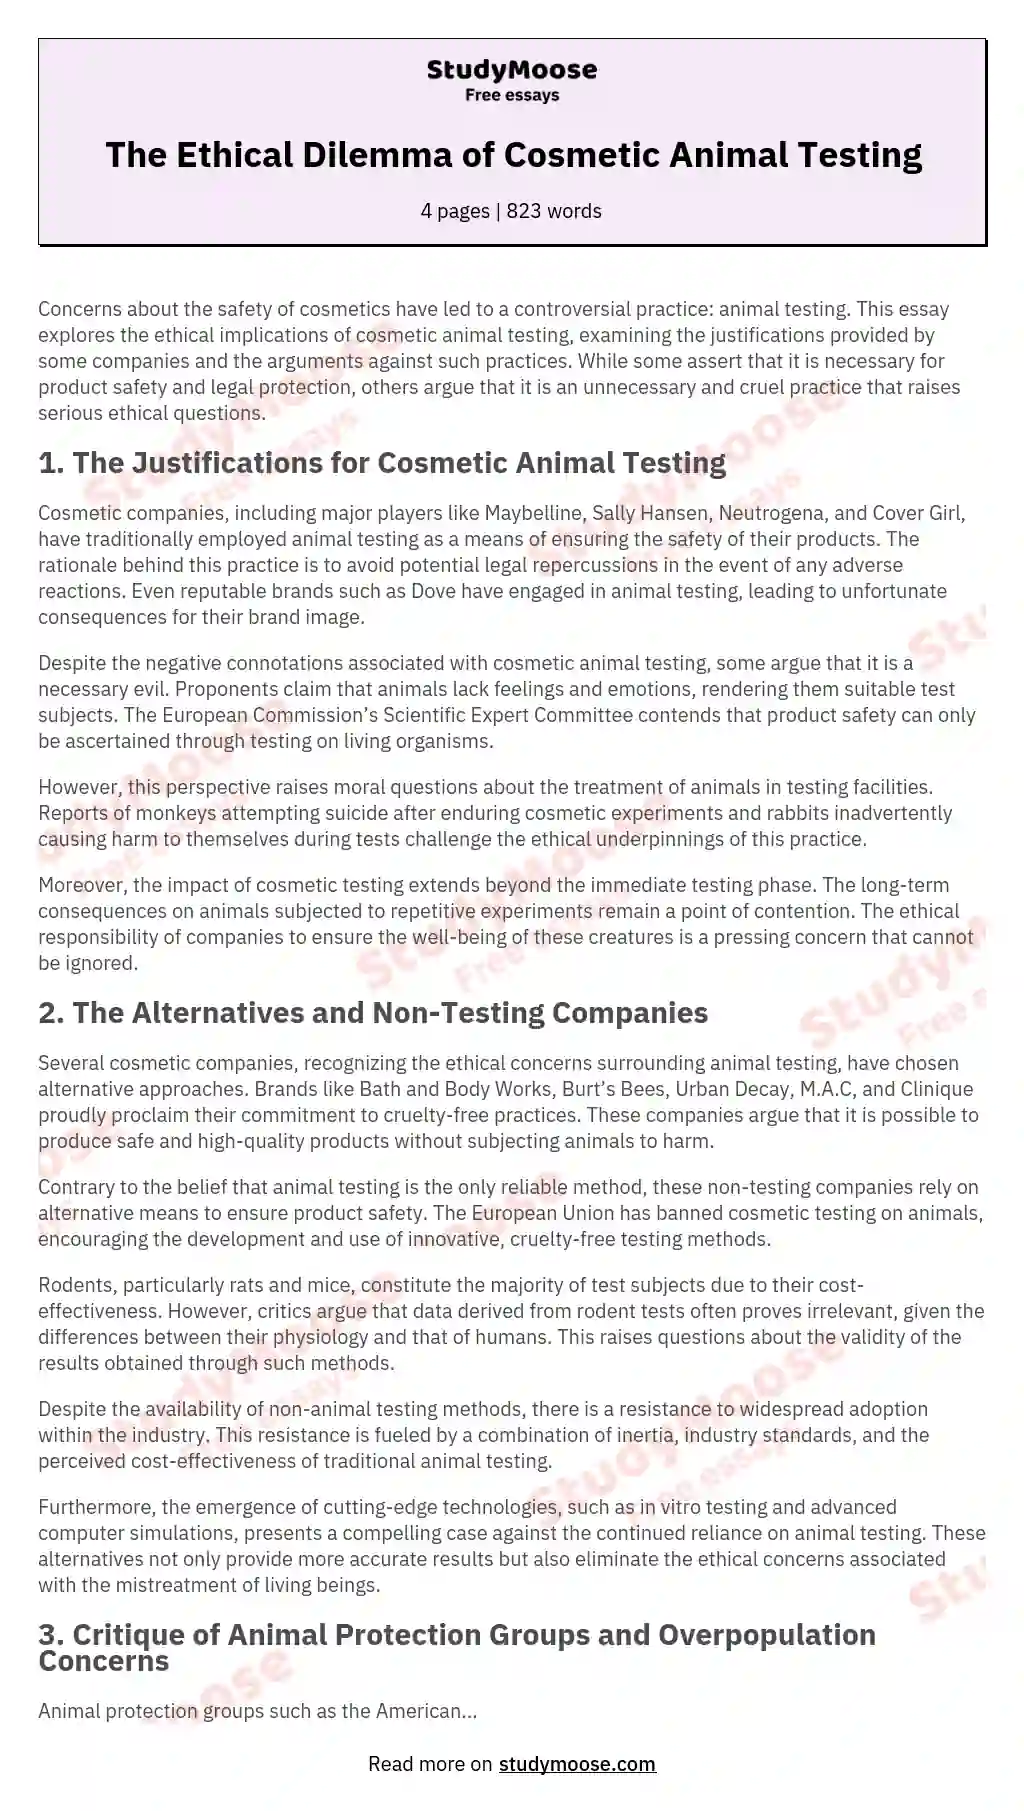 The Ethical Dilemma of Cosmetic Animal Testing essay